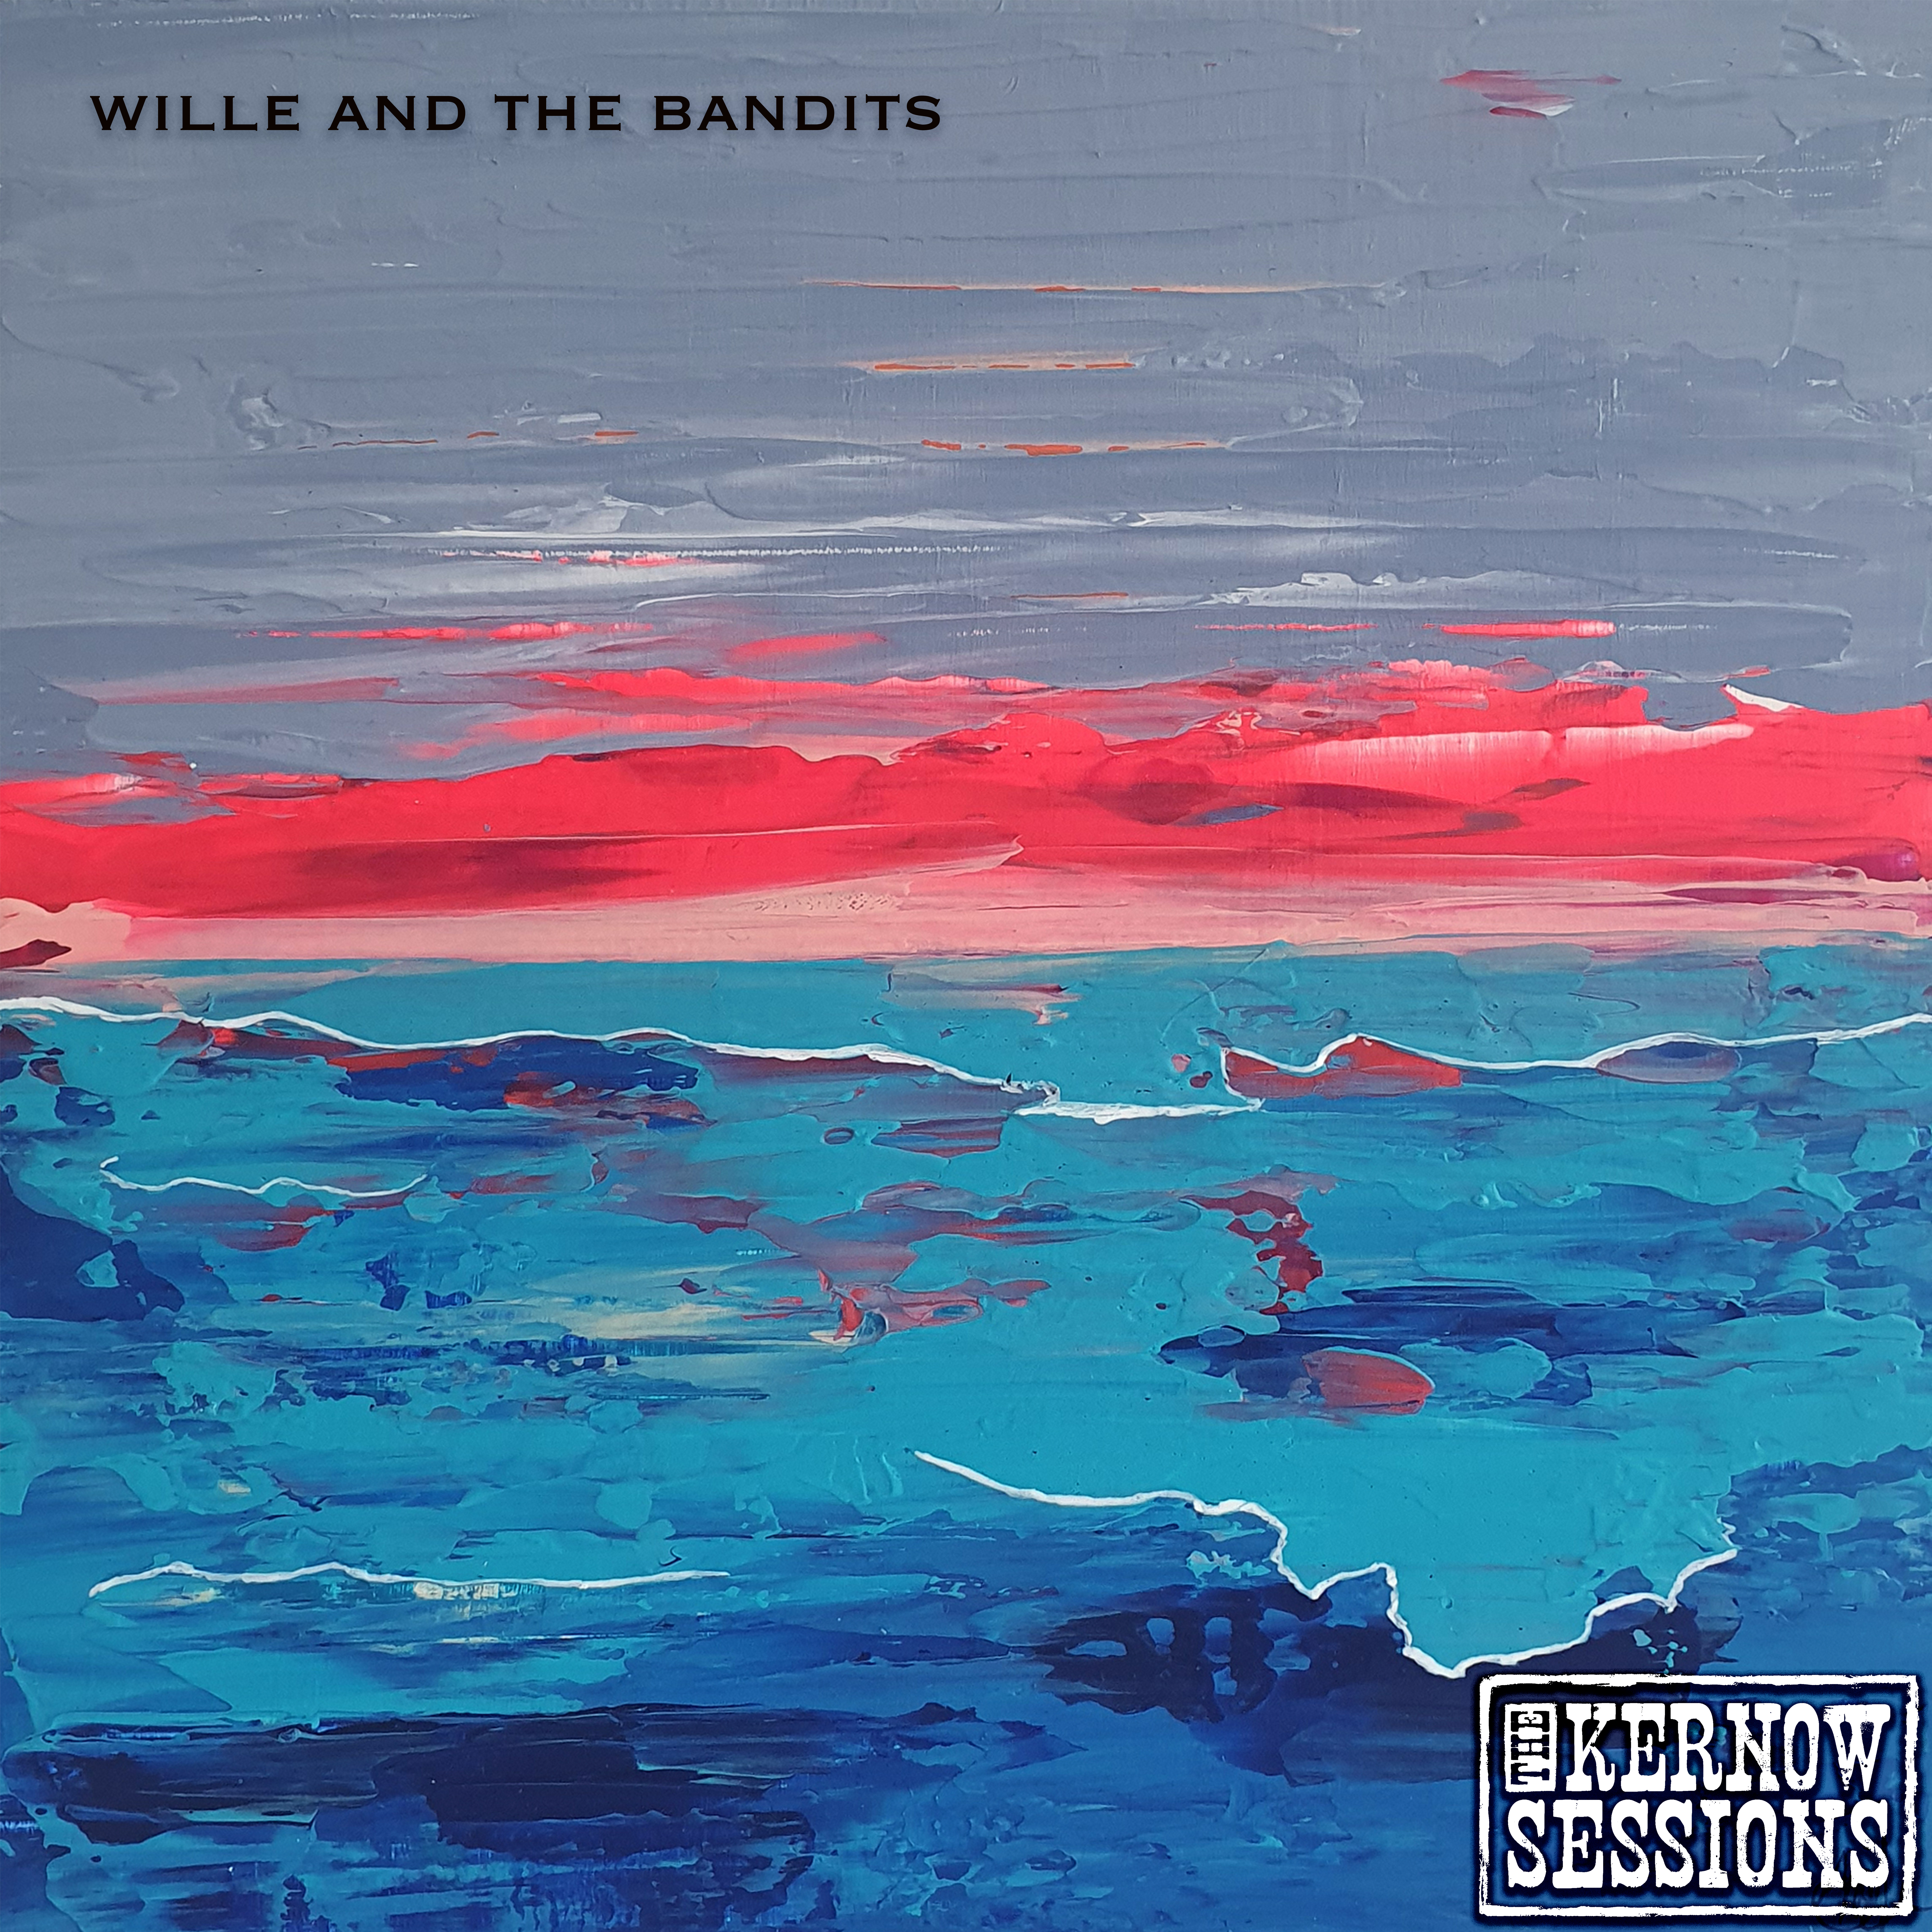 Kernow Sessions Vinyl Double | Live Album - Wille and the Bandits